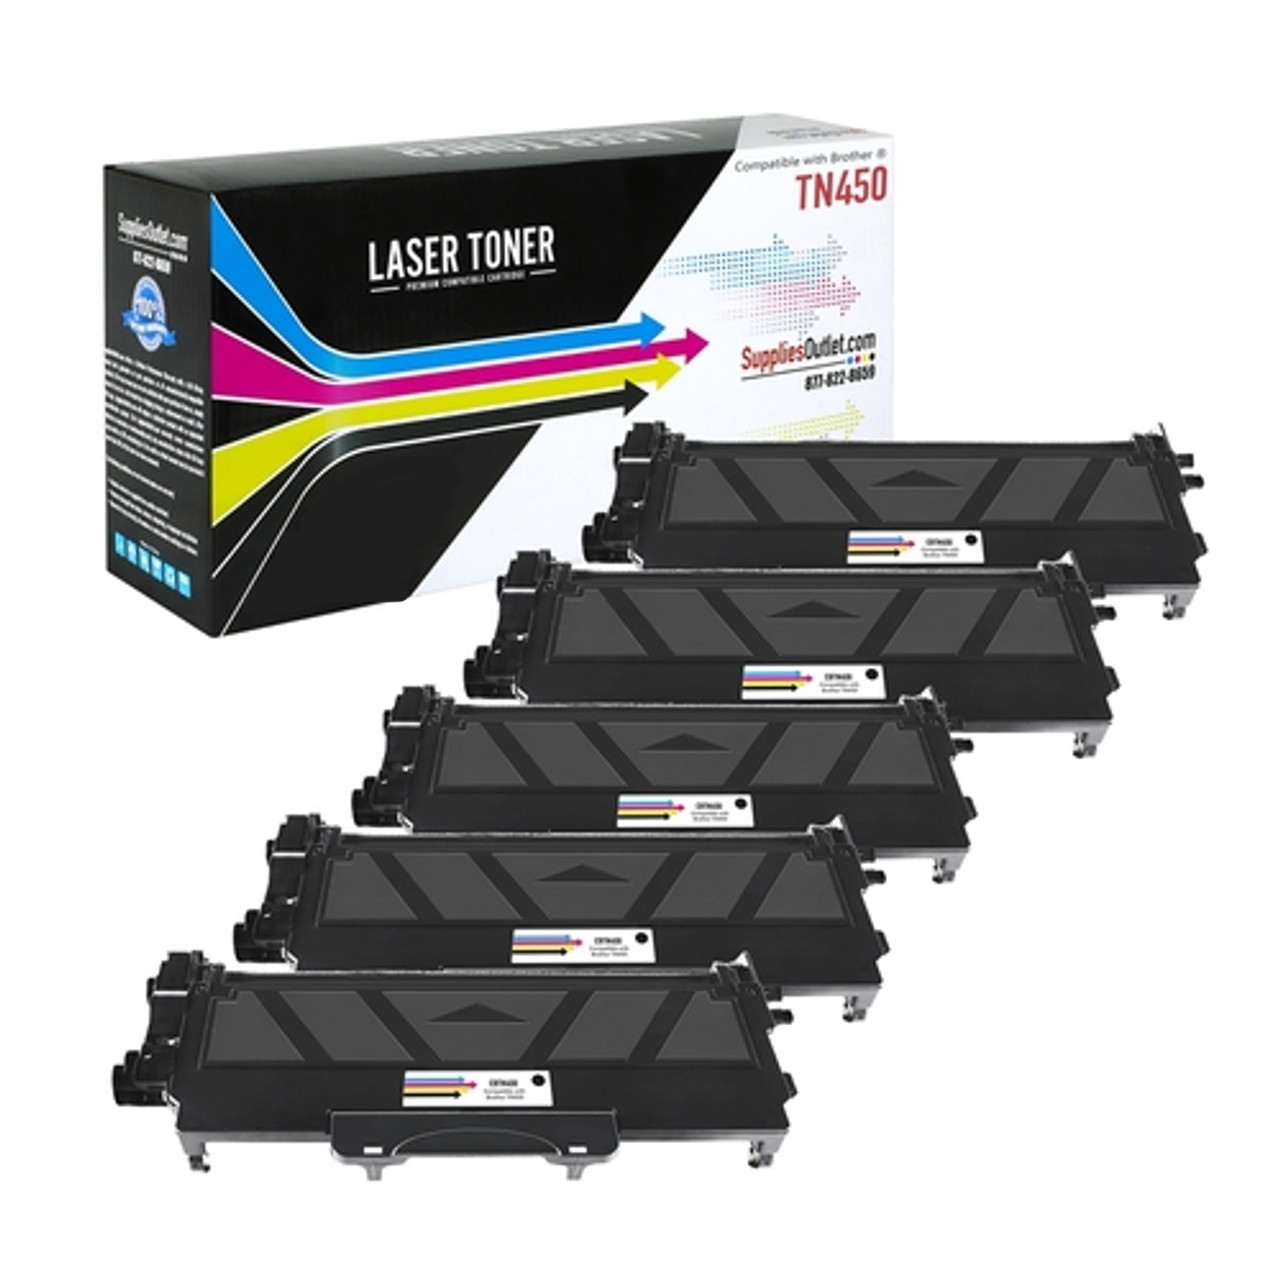 Compatible Brother TN-450 Black High Yield Toner Cartridge - 2600 Page Yield